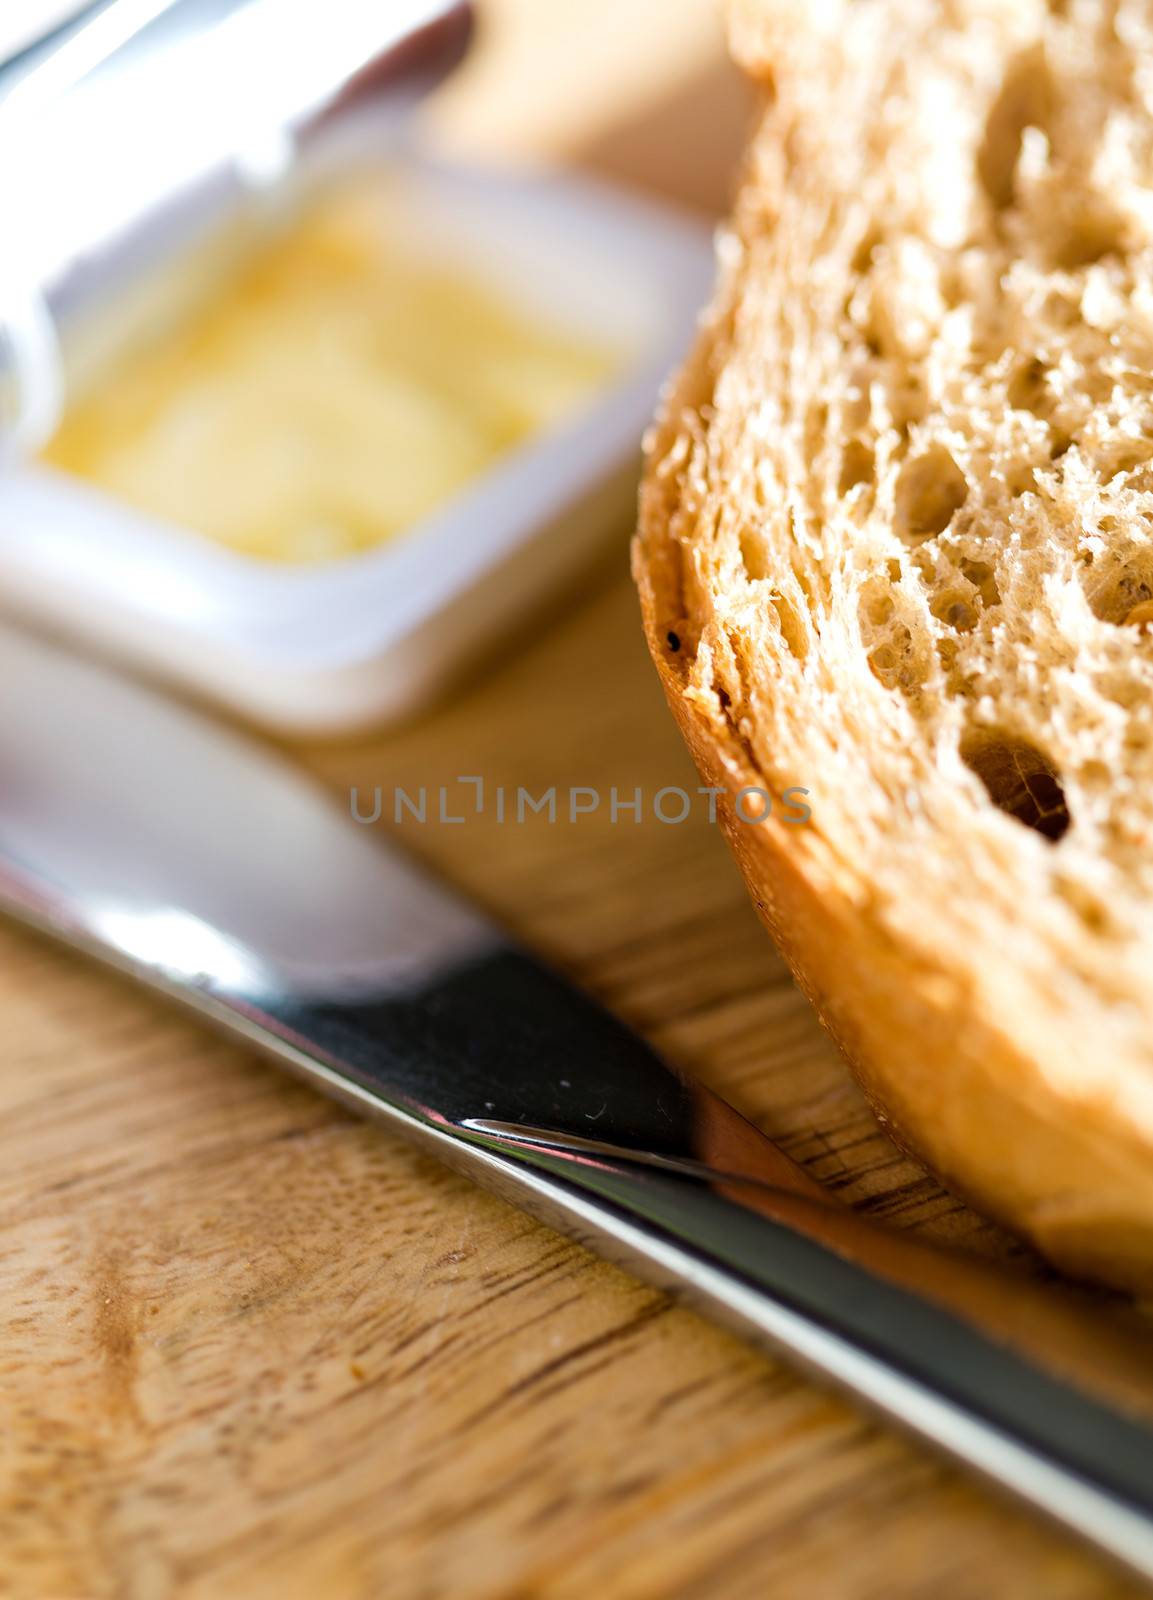 Cropped image of bread and fresh butter with knife on table